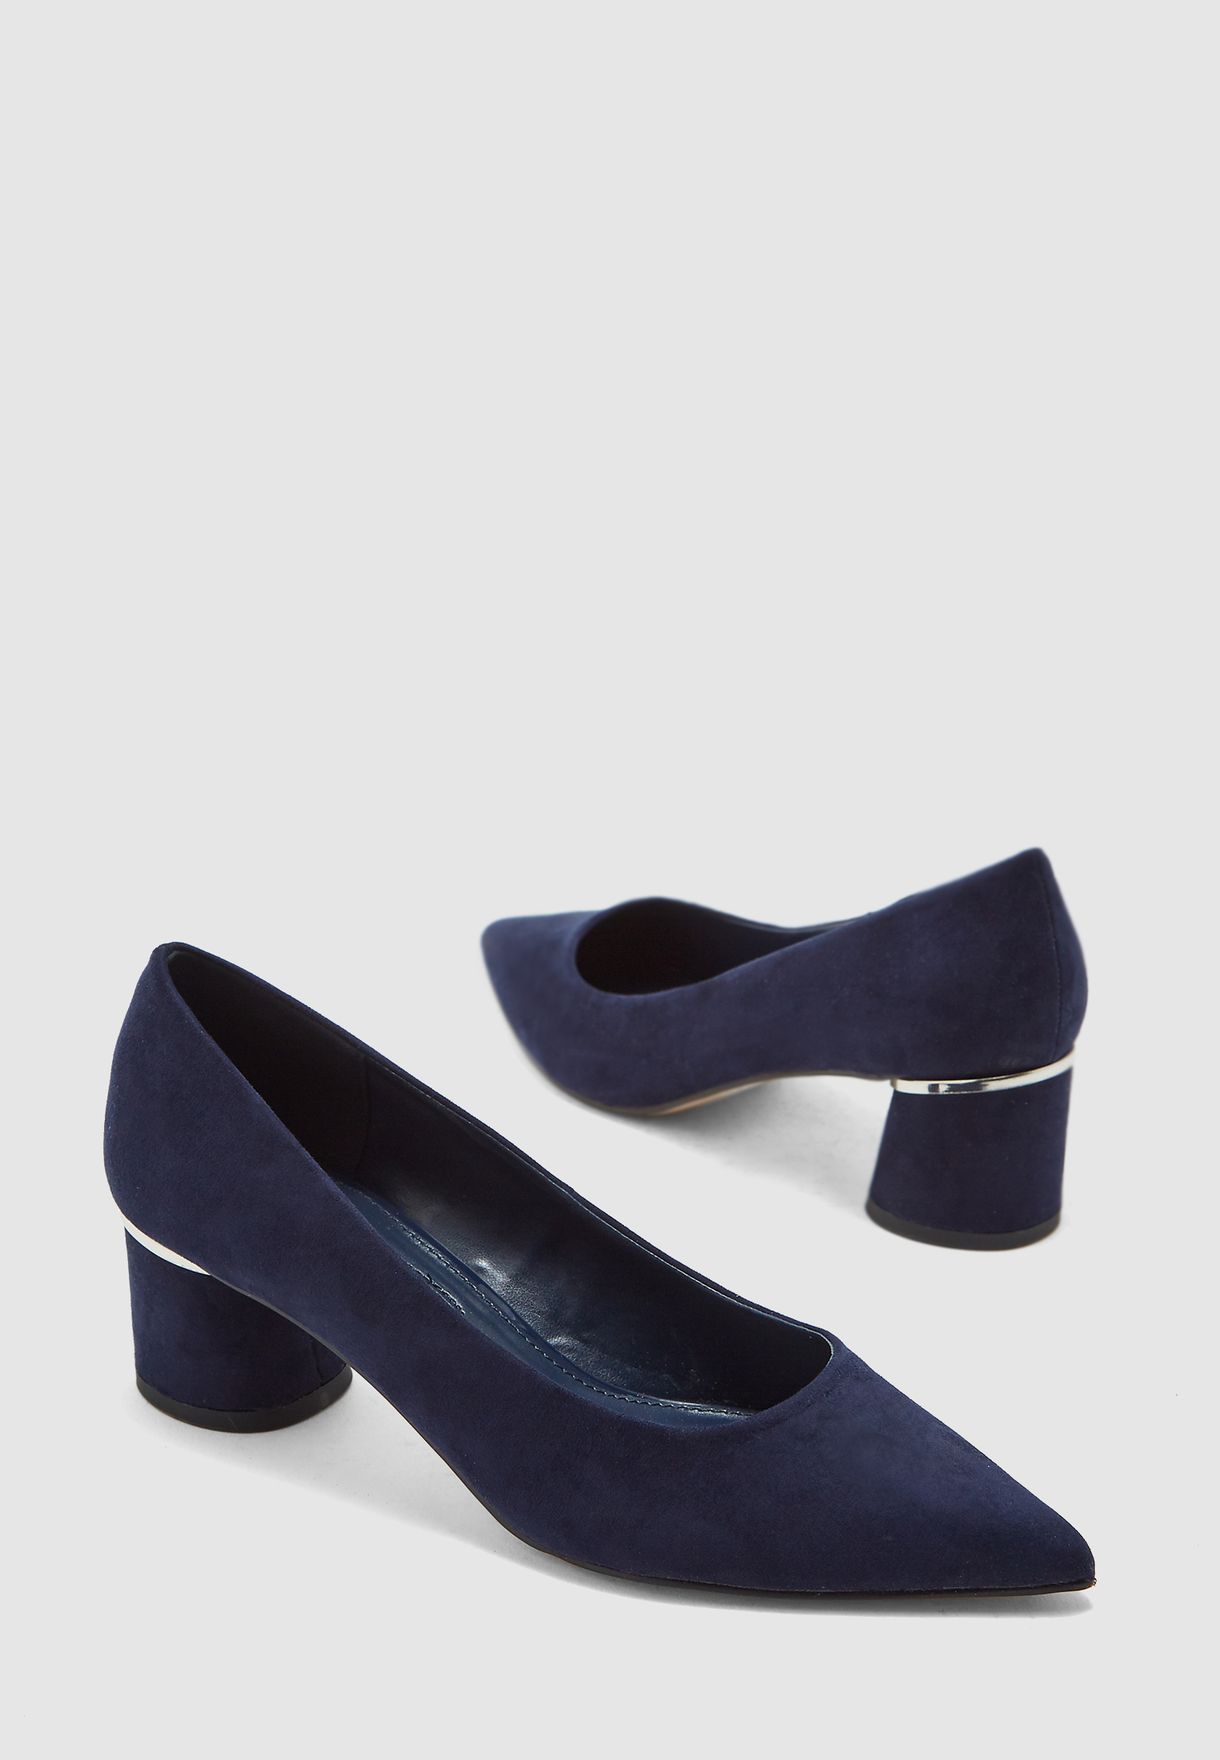 dorothy perkins navy court shoes